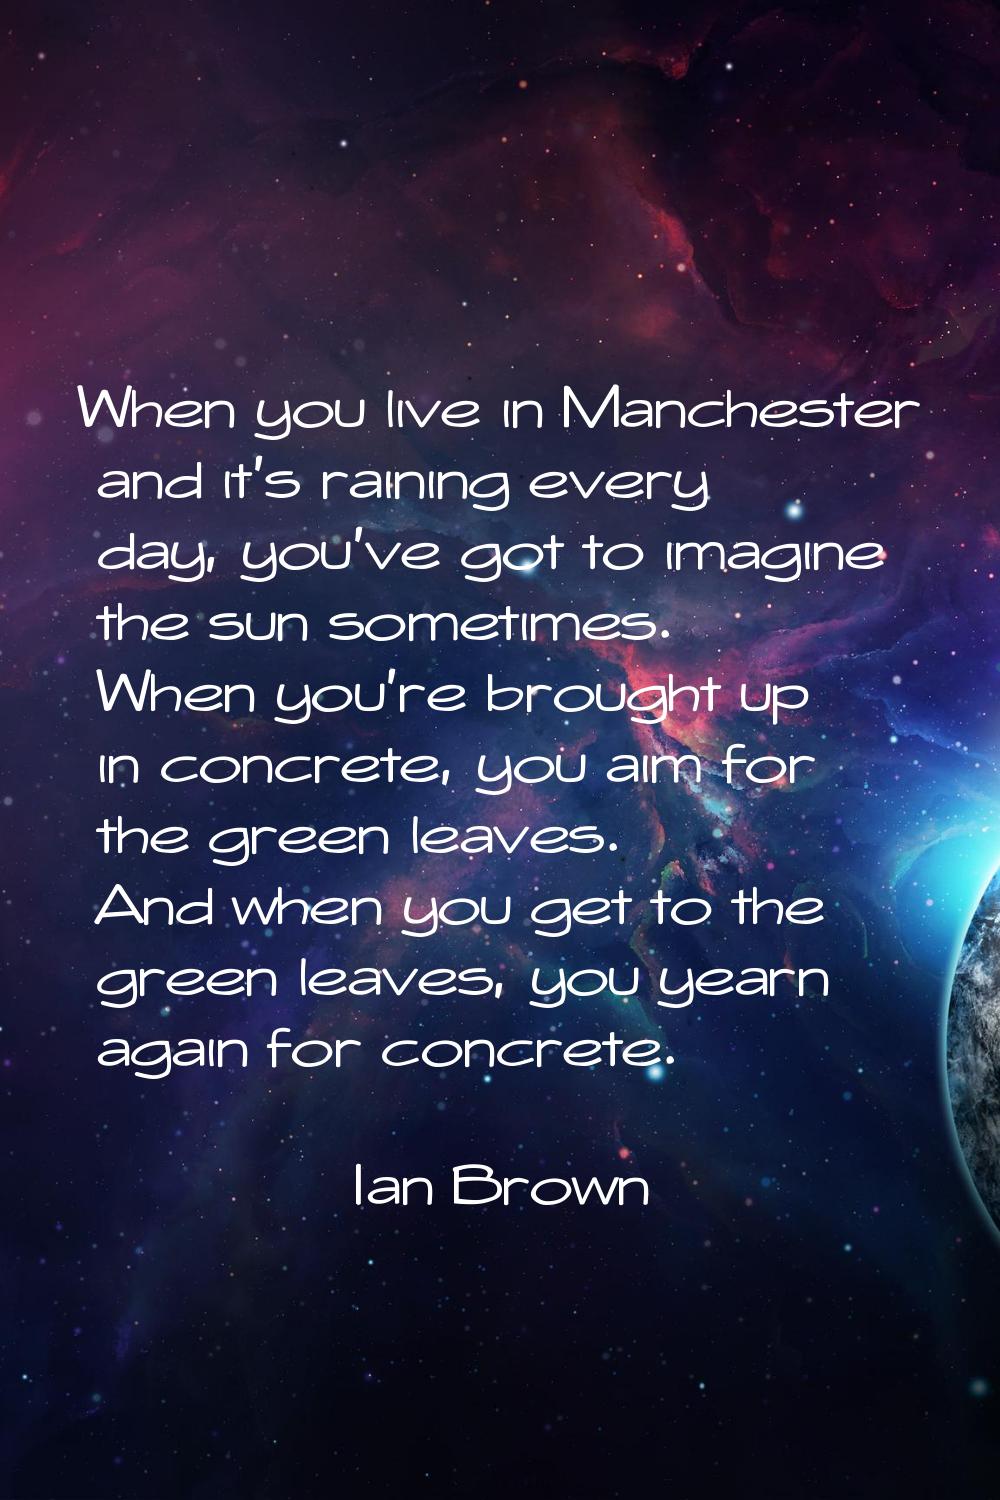 When you live in Manchester and it's raining every day, you've got to imagine the sun sometimes. Wh